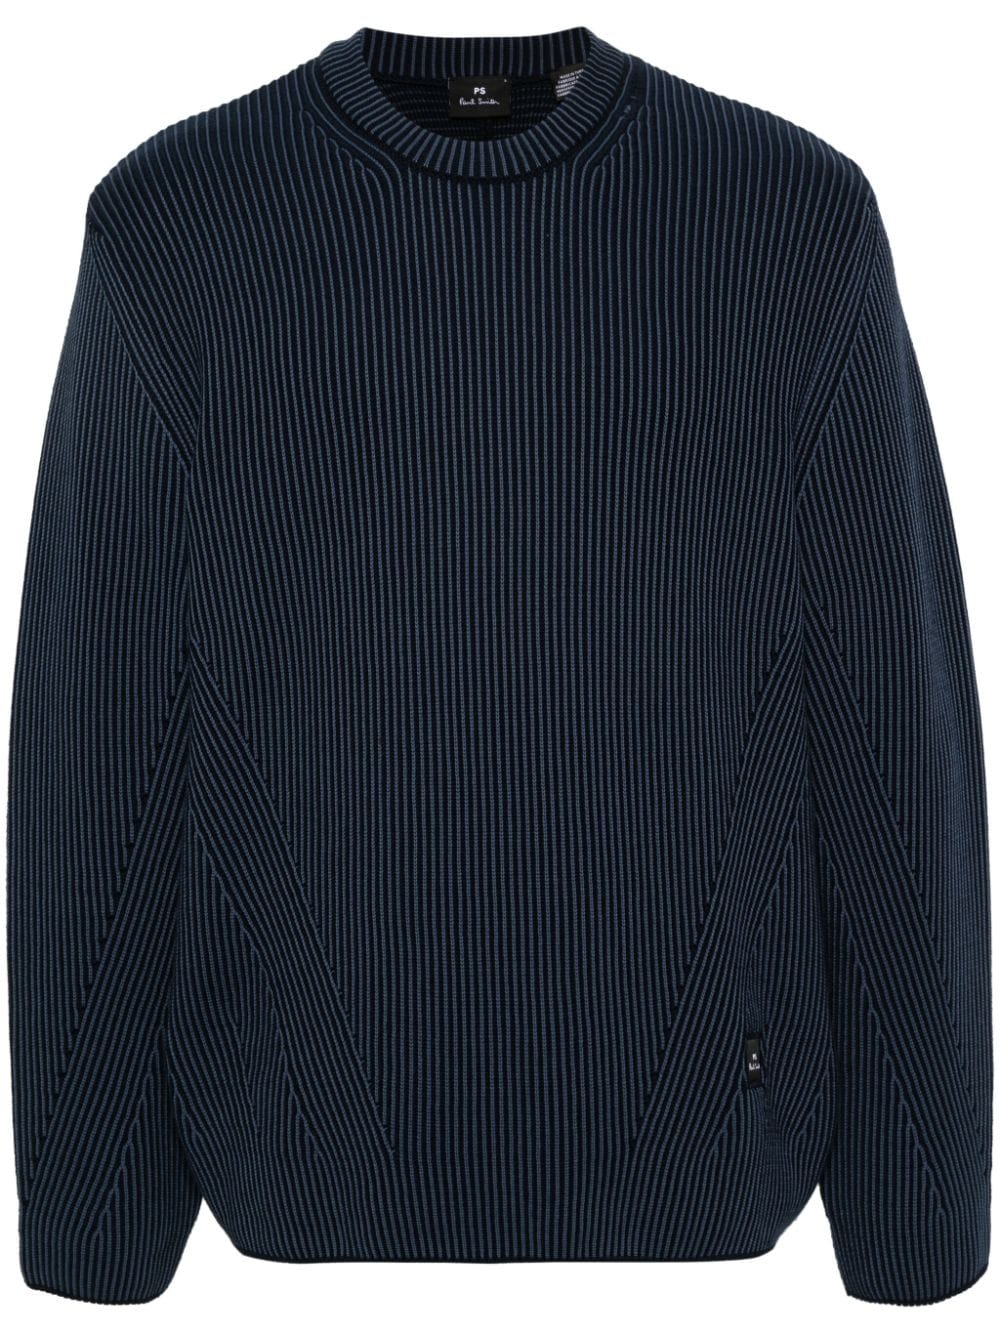 PS Paul Smith stripe-patterned jumper - Blue von PS Paul Smith